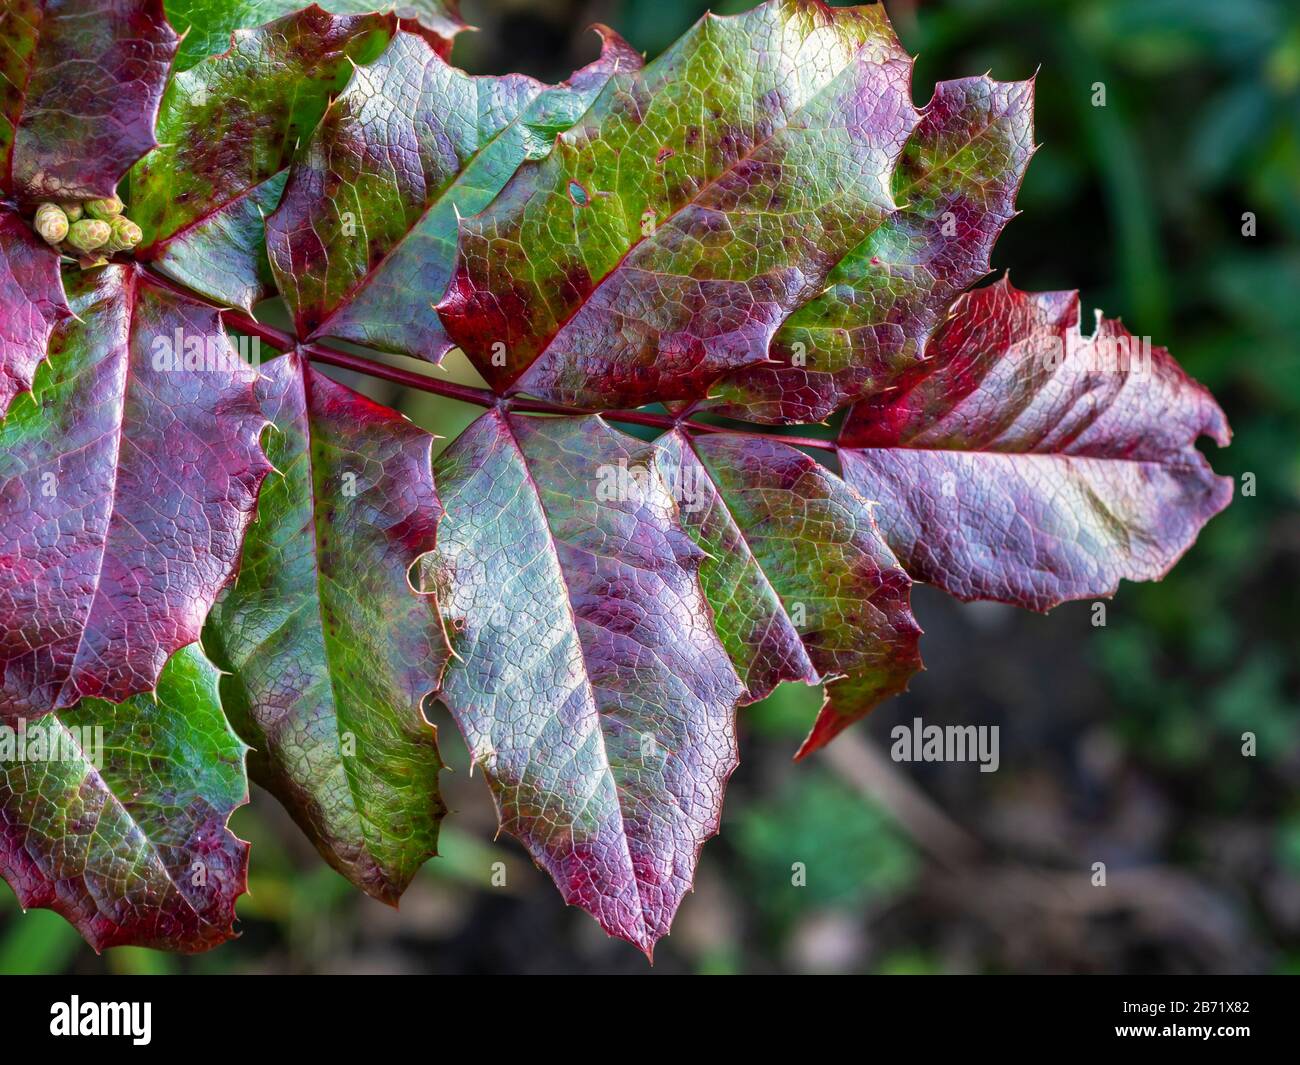 Holly leaves with bright red and green colours and a textured surface on a garden bush in winter Stock Photo